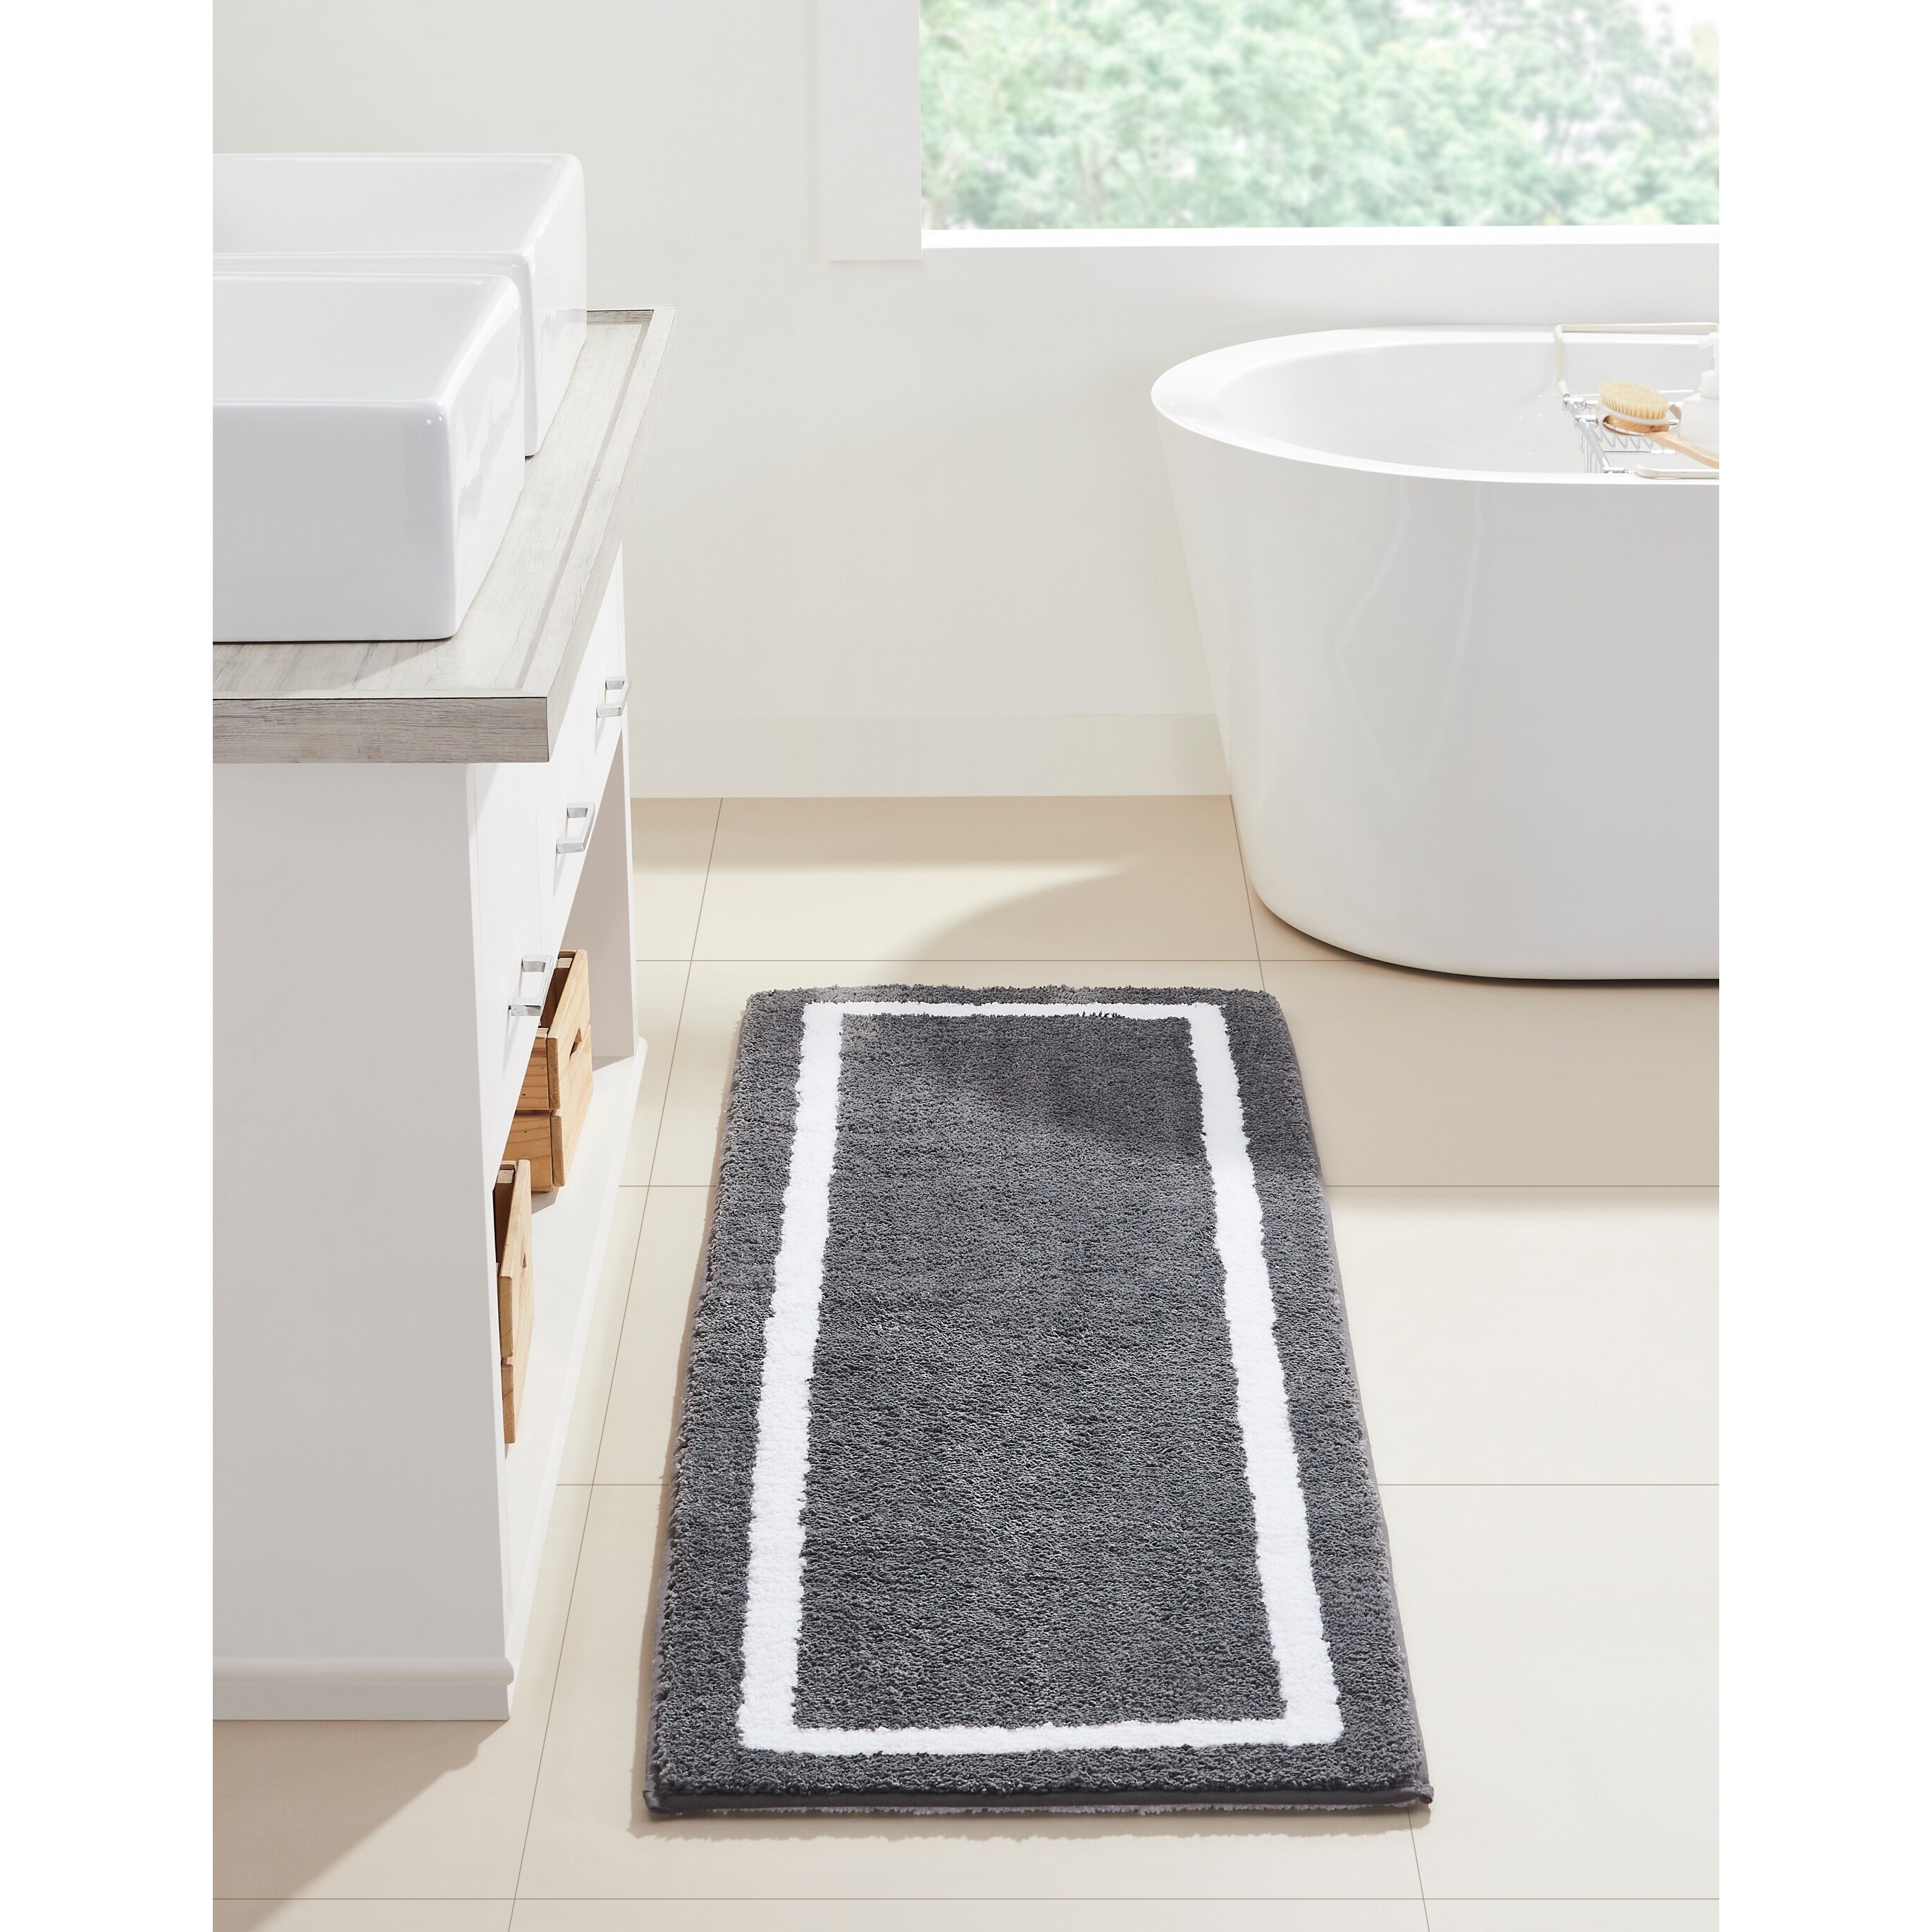 https://ak1.ostkcdn.com/images/products/is/images/direct/ffbf1ae0df3874fed2405bfb4b4773847866e498/Better-Trends-Pegasus-Tufted-Reversible-Bath-Mat-Rug-100%25-Polyester.jpg